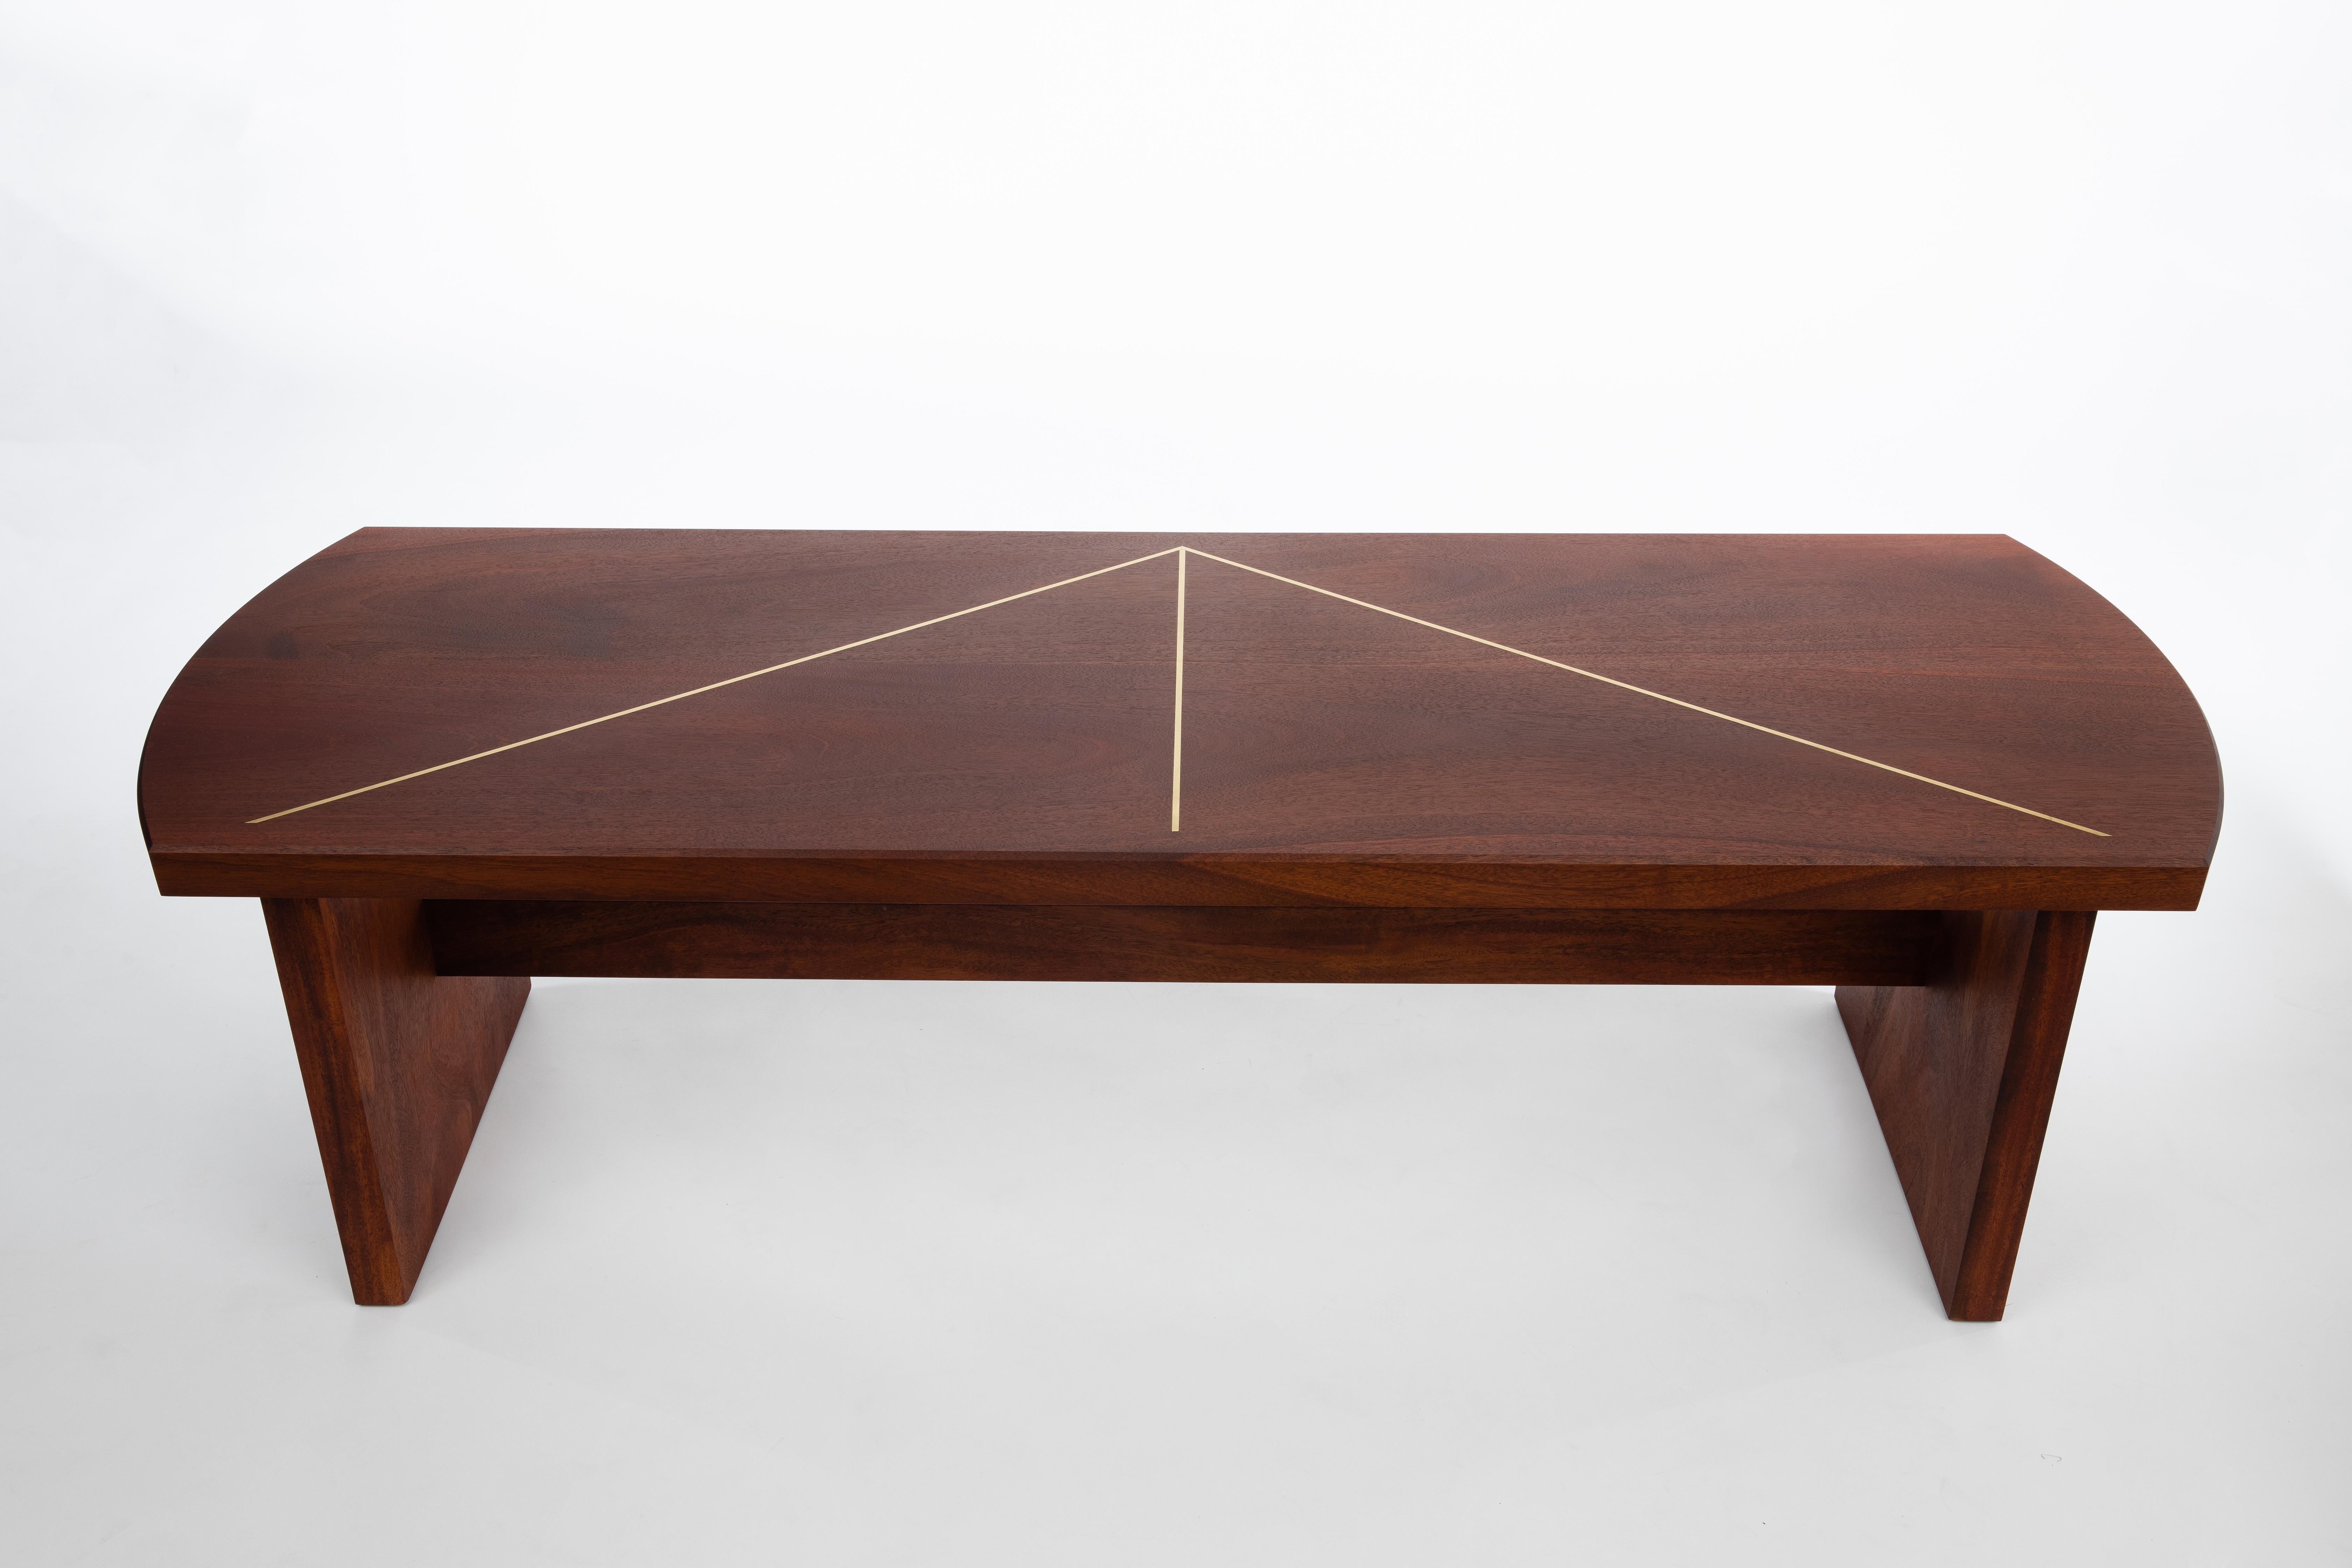 The Deco Table is made from solid, reclaimed Florida mahogany that was toppled during a hurricane. The streamlined top is inlaid with brass in an elegant deco motif. Every piece I make is unique. I work with a master woodworker to create each design